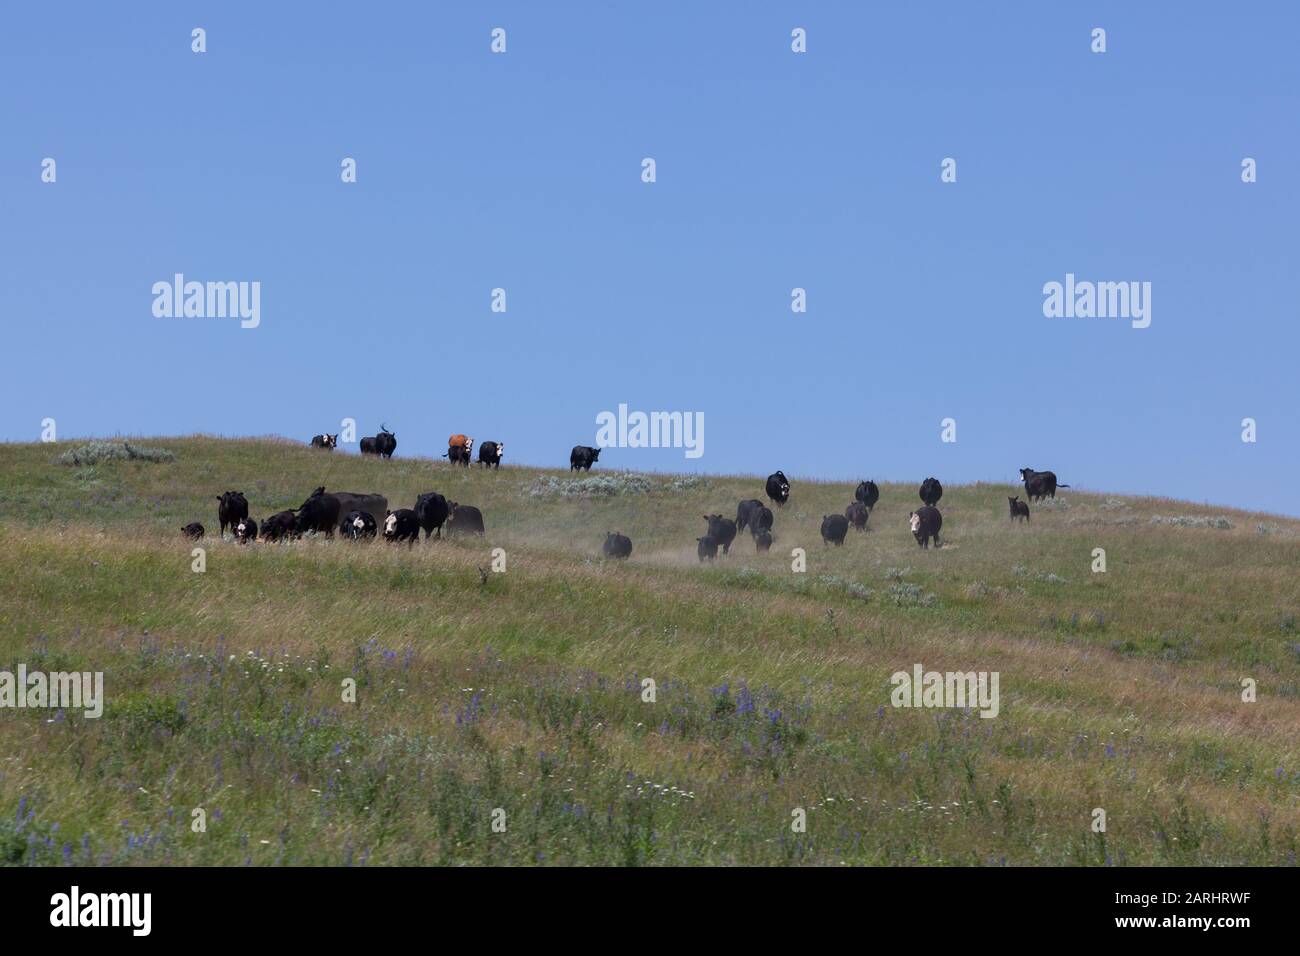 A herd of cattle, made up of mothers and babies, running over and down a grassy hillside with a clear blue sky background. Stock Photo